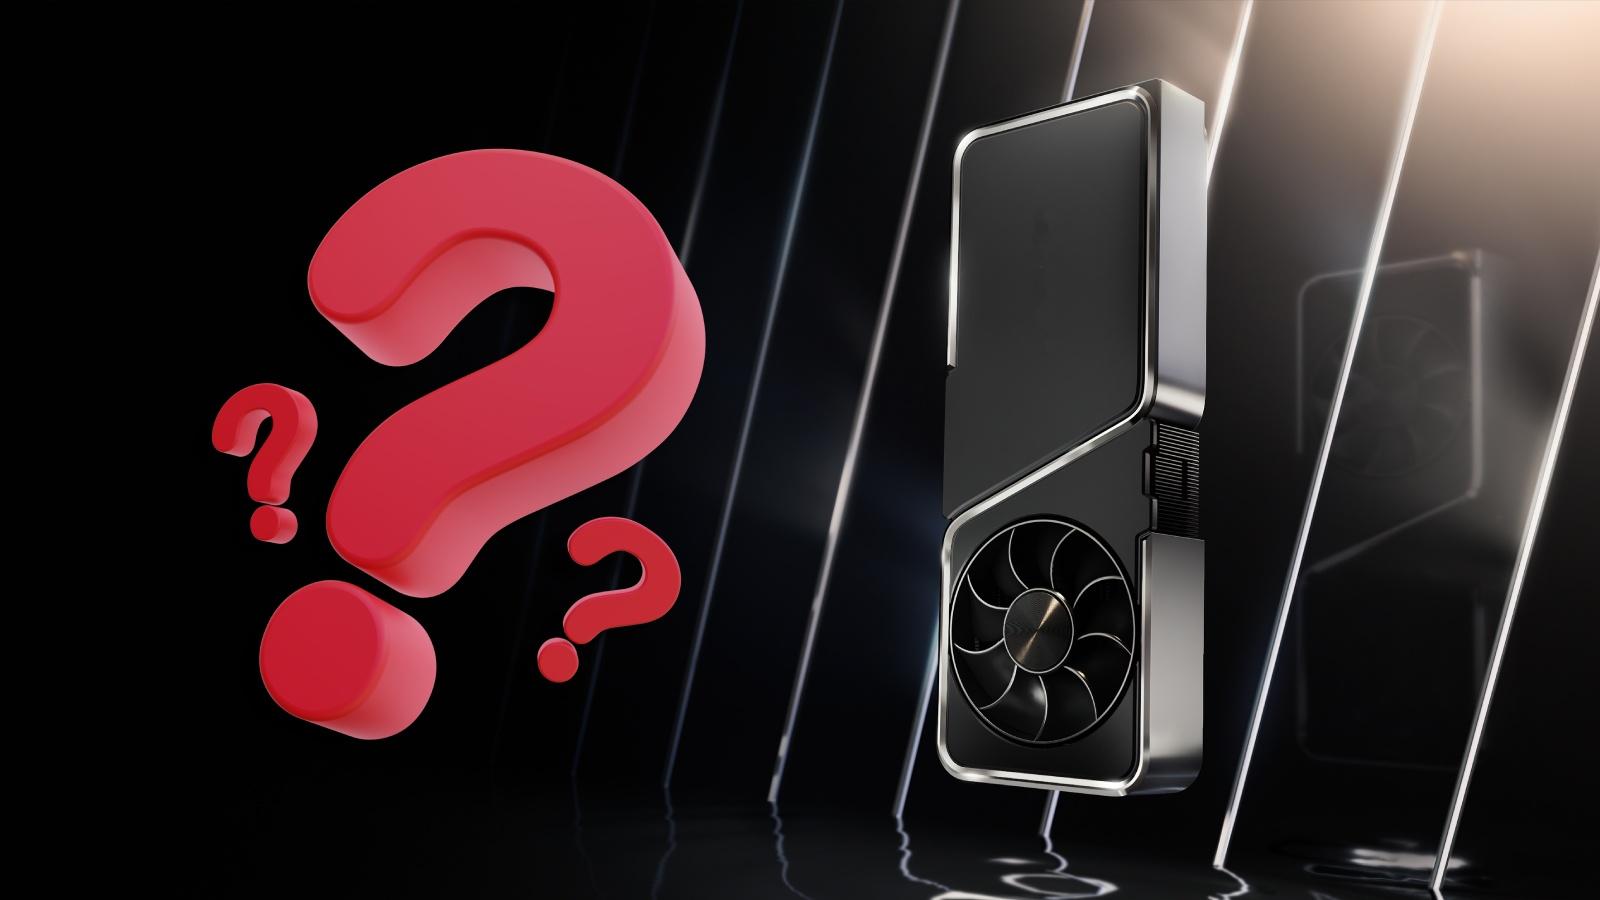 A GPU with a red question mark next to it